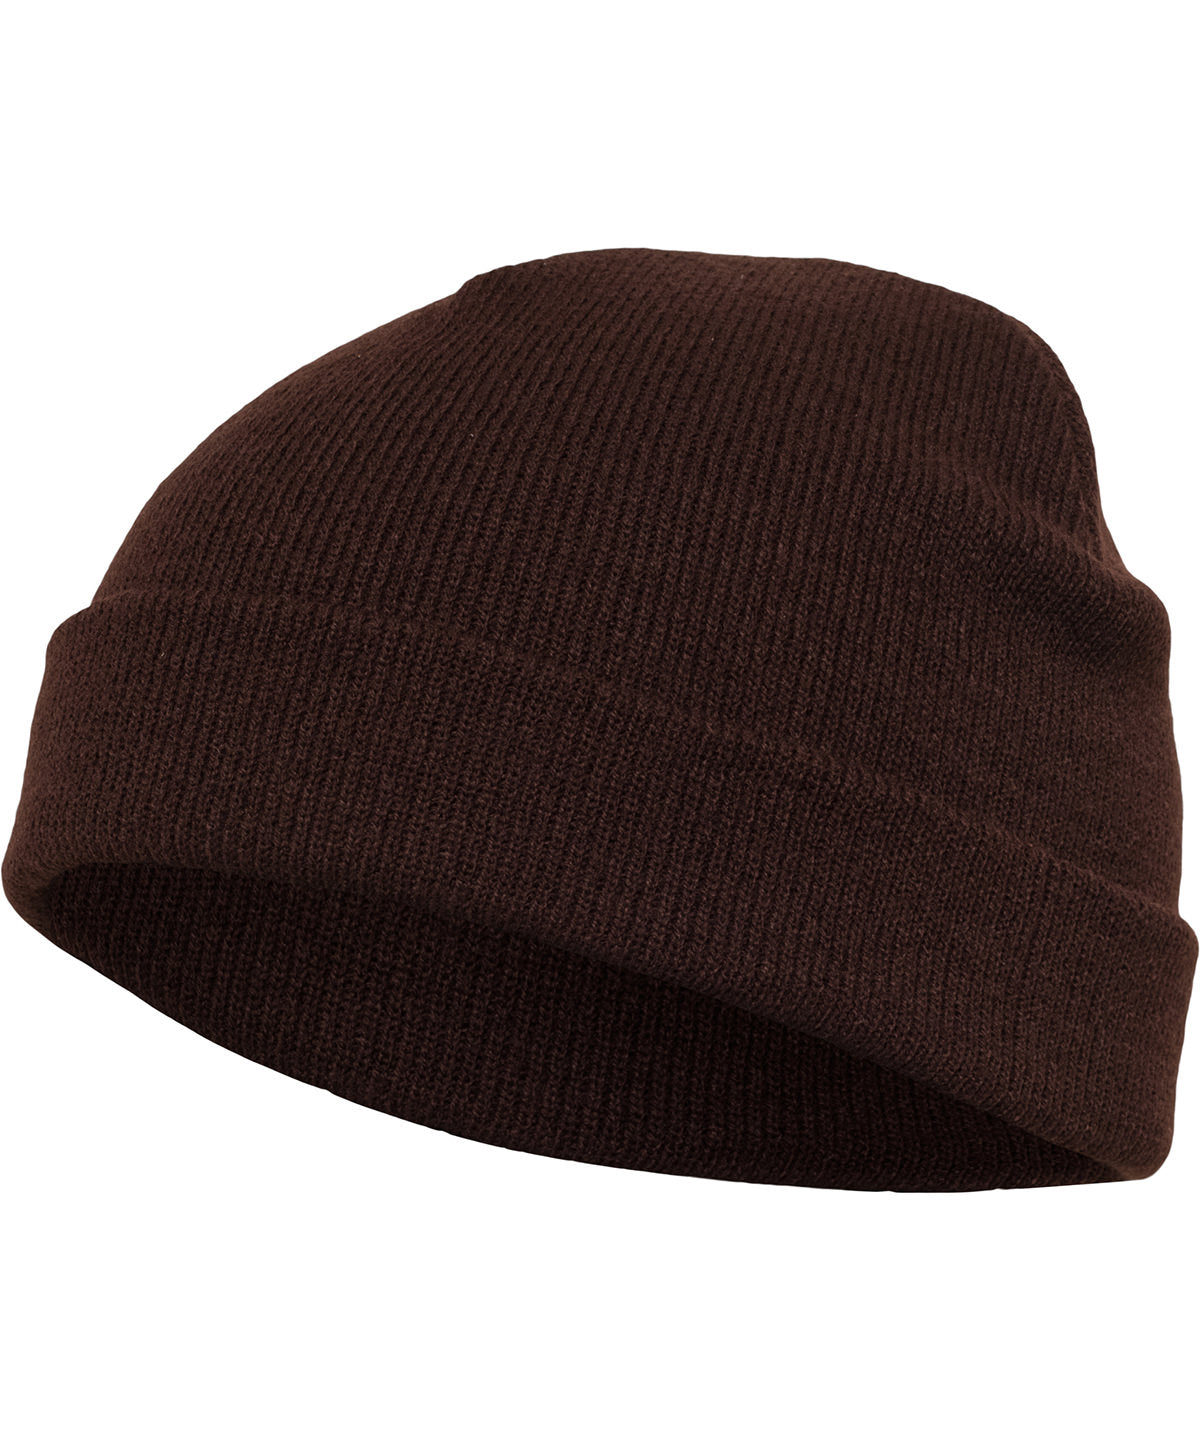 Brown - Heavyweight beanie (1500KC) Hats Flexfit by Yupoong Headwear, New Colours for 2023, Winter Essentials Schoolwear Centres